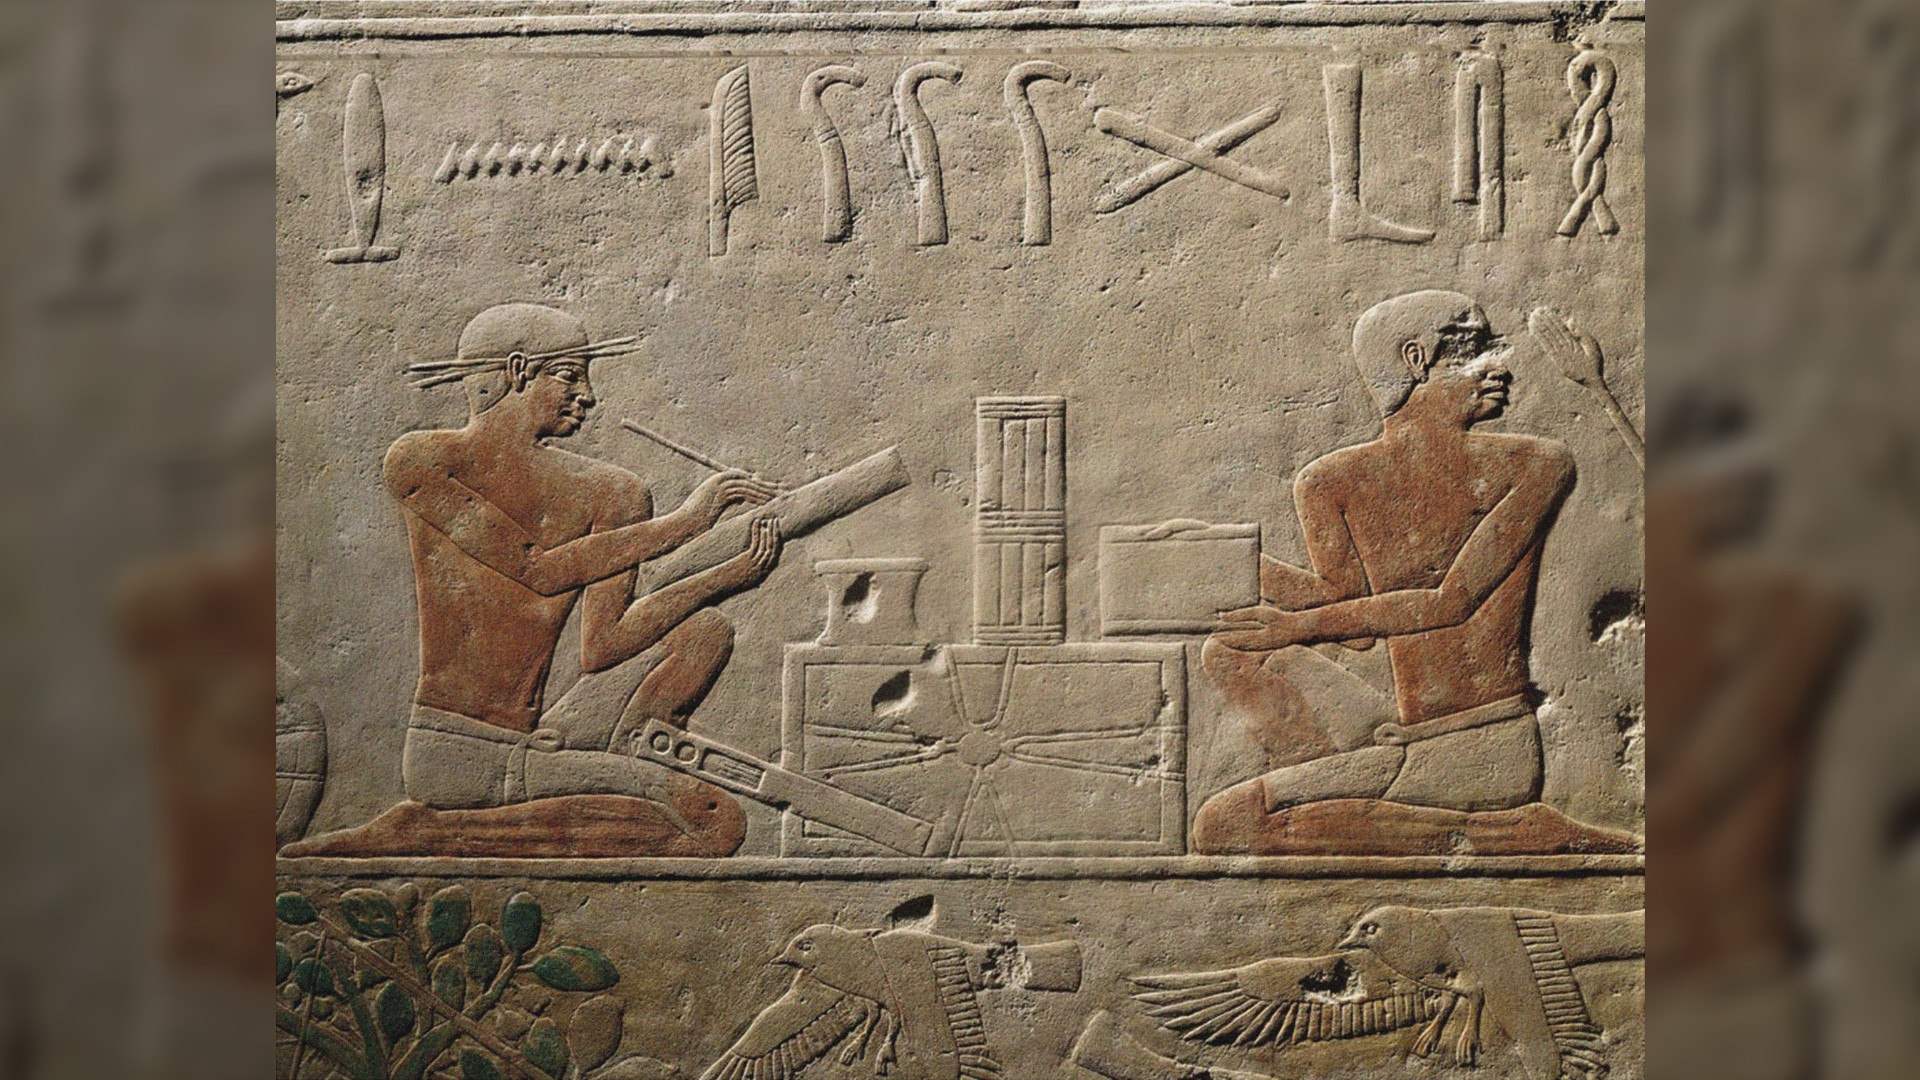 This is a relief from the mastaba of Akhethotep in Saqqara, Old Kingdom from around the 5th dynasty, ca. 2494-2345 BC.  Here we see 2 scribes facing each other.  One writes on a tablet while the other holds up parchment.  Above are several hieroglyphs, and below are 2 images of flying birds.